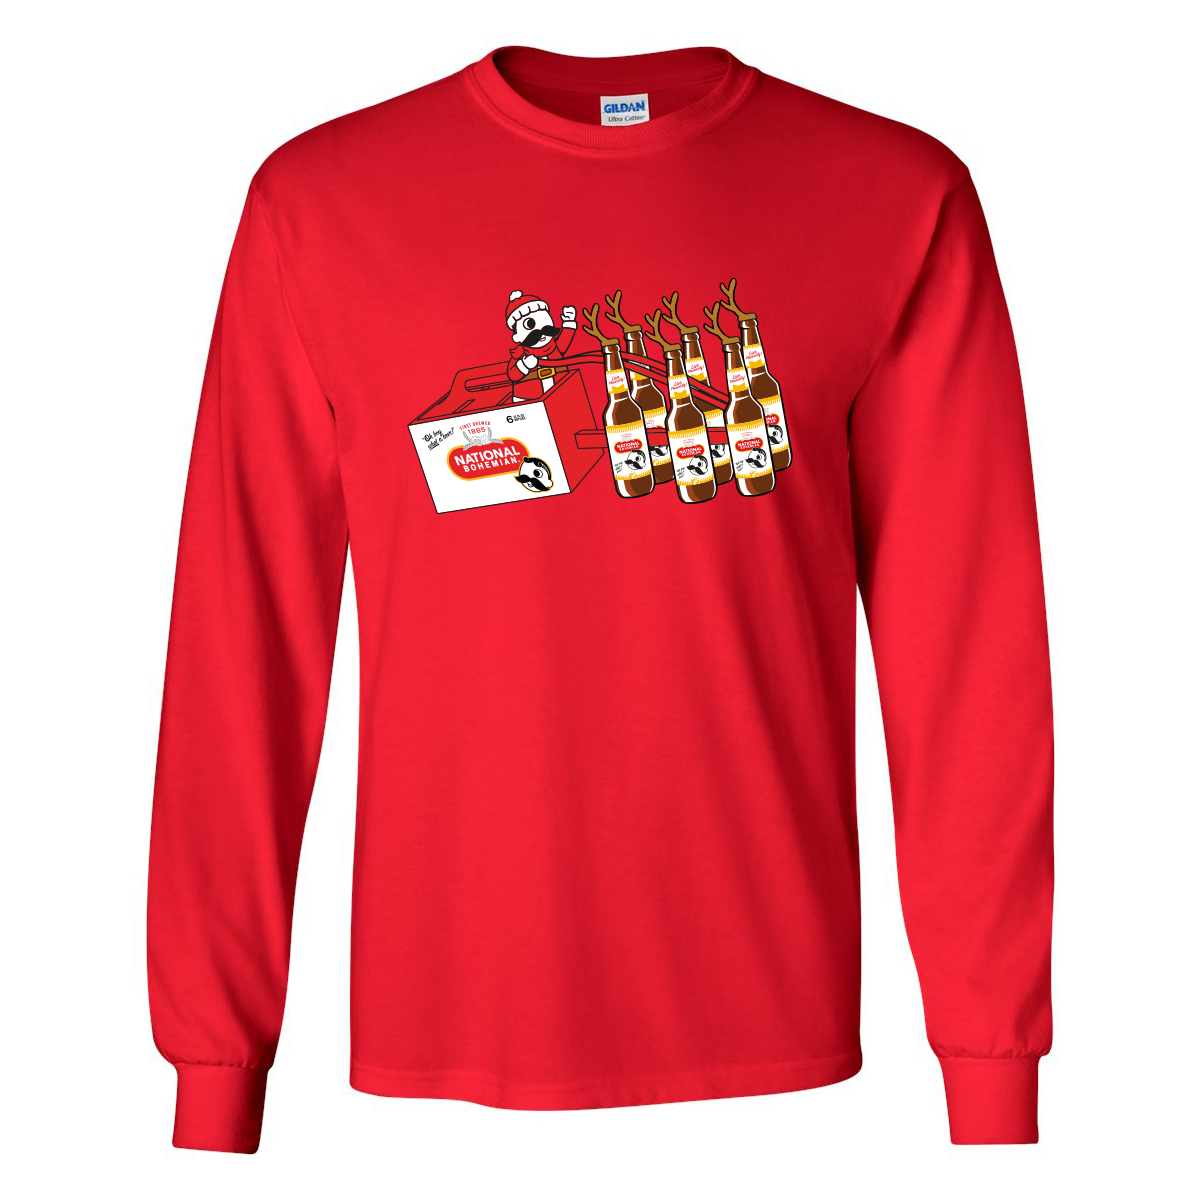 *PRE-ORDER* Natty Boh Beer Sleigh Ride (Red) / Long Sleeve Shirt (Estimated Ship Date: 12/15) - Route One Apparel